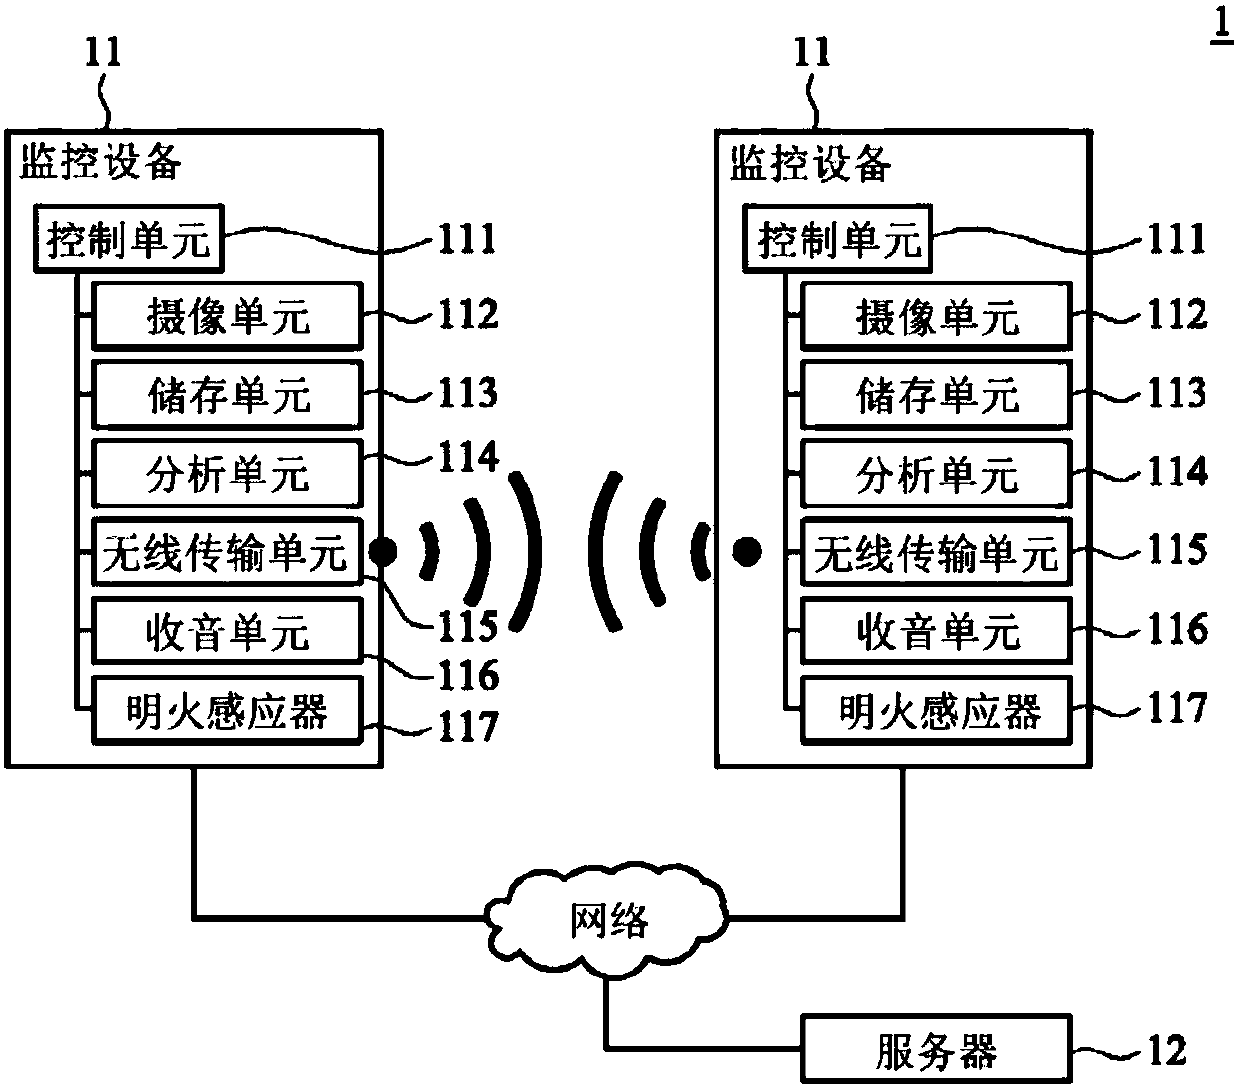 Traffic audio and video receiving and analysis system